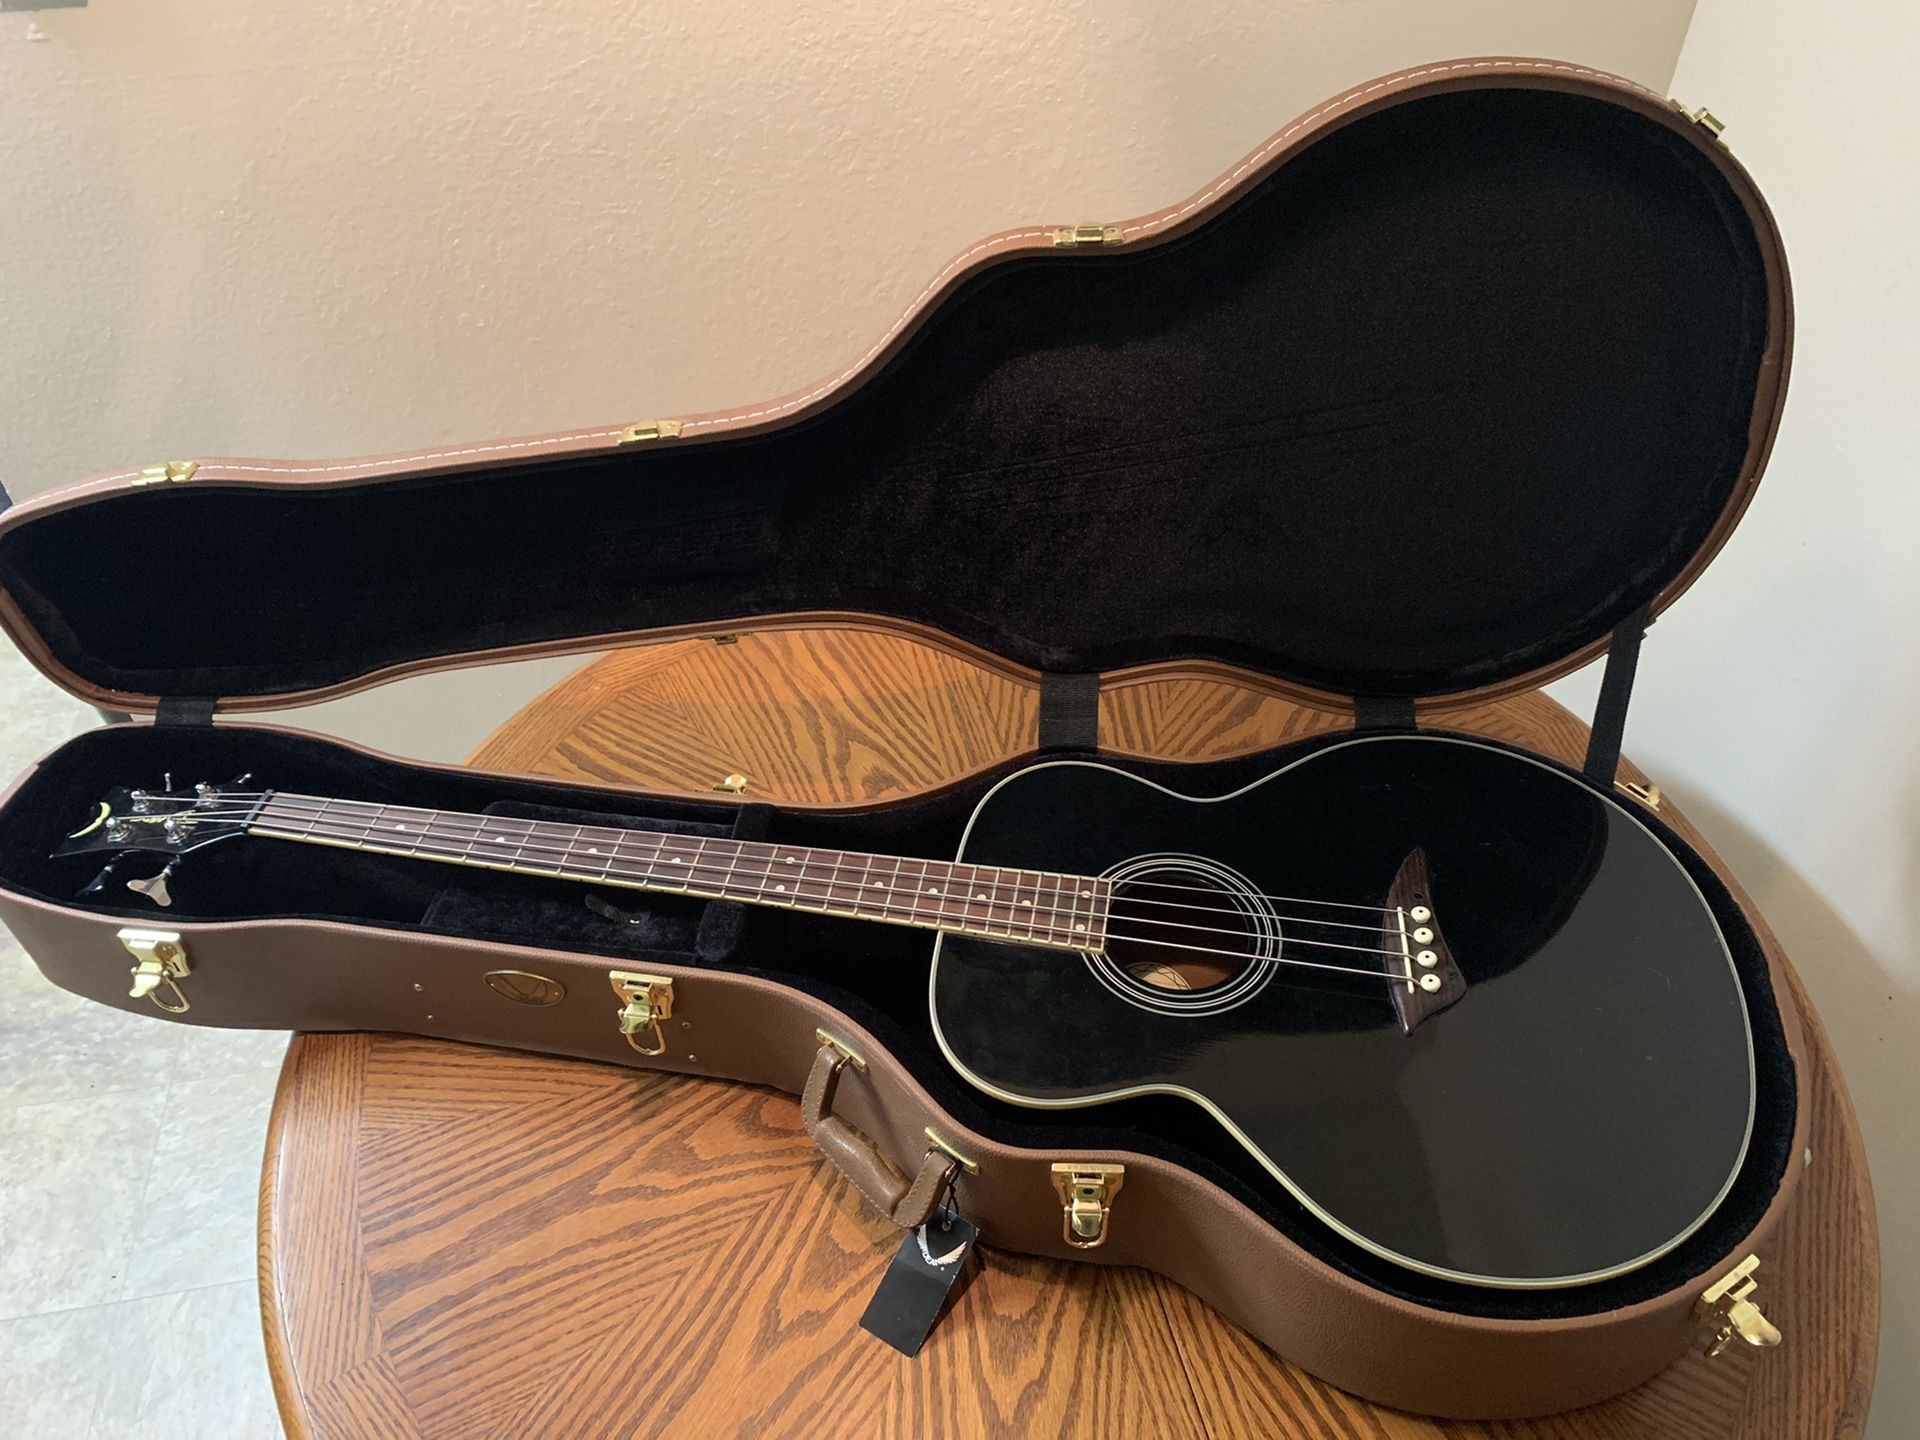 Ibanez acoustic/electric bass guitar